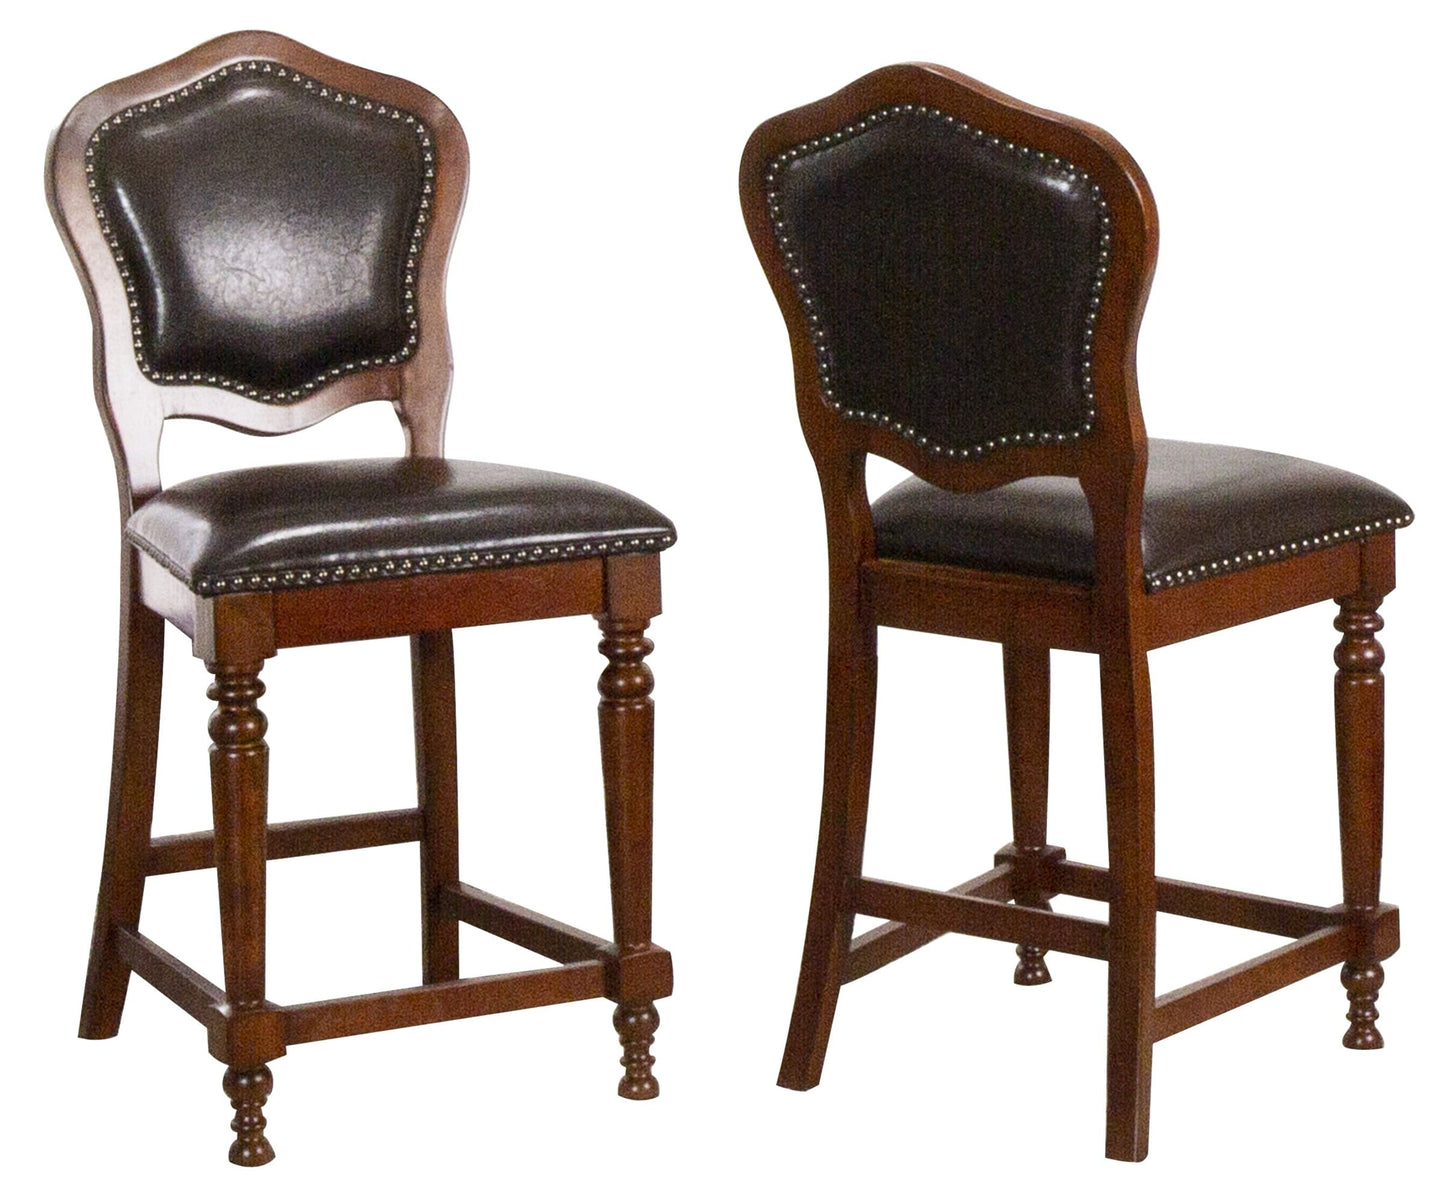 The set of 2 Bellagio  Upholstered Counter Height Chairs 